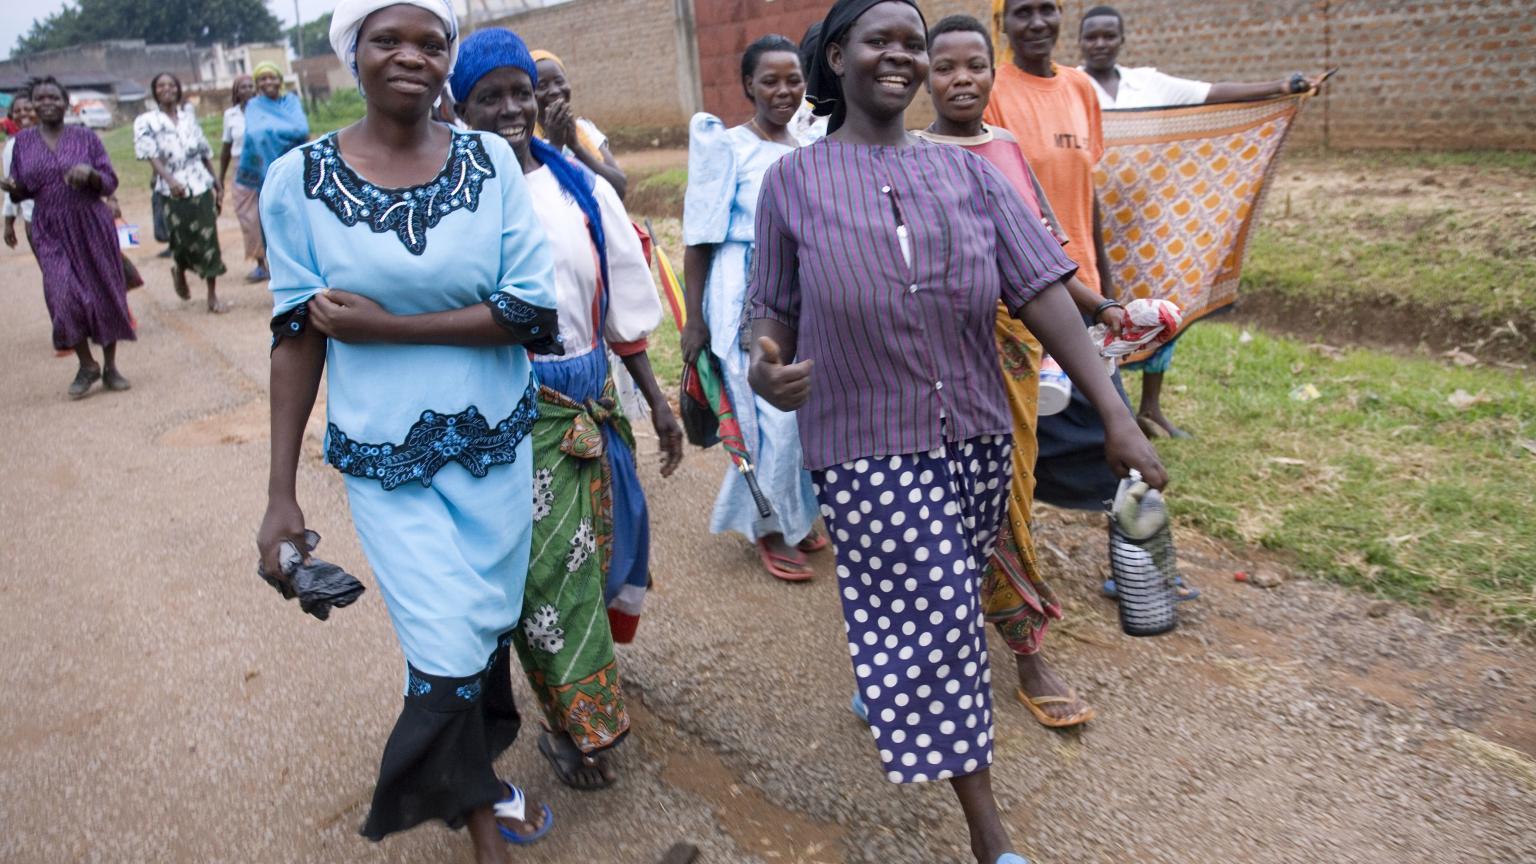 Female coffee sorters in Uganda on their way to the sorting house at Mbale.